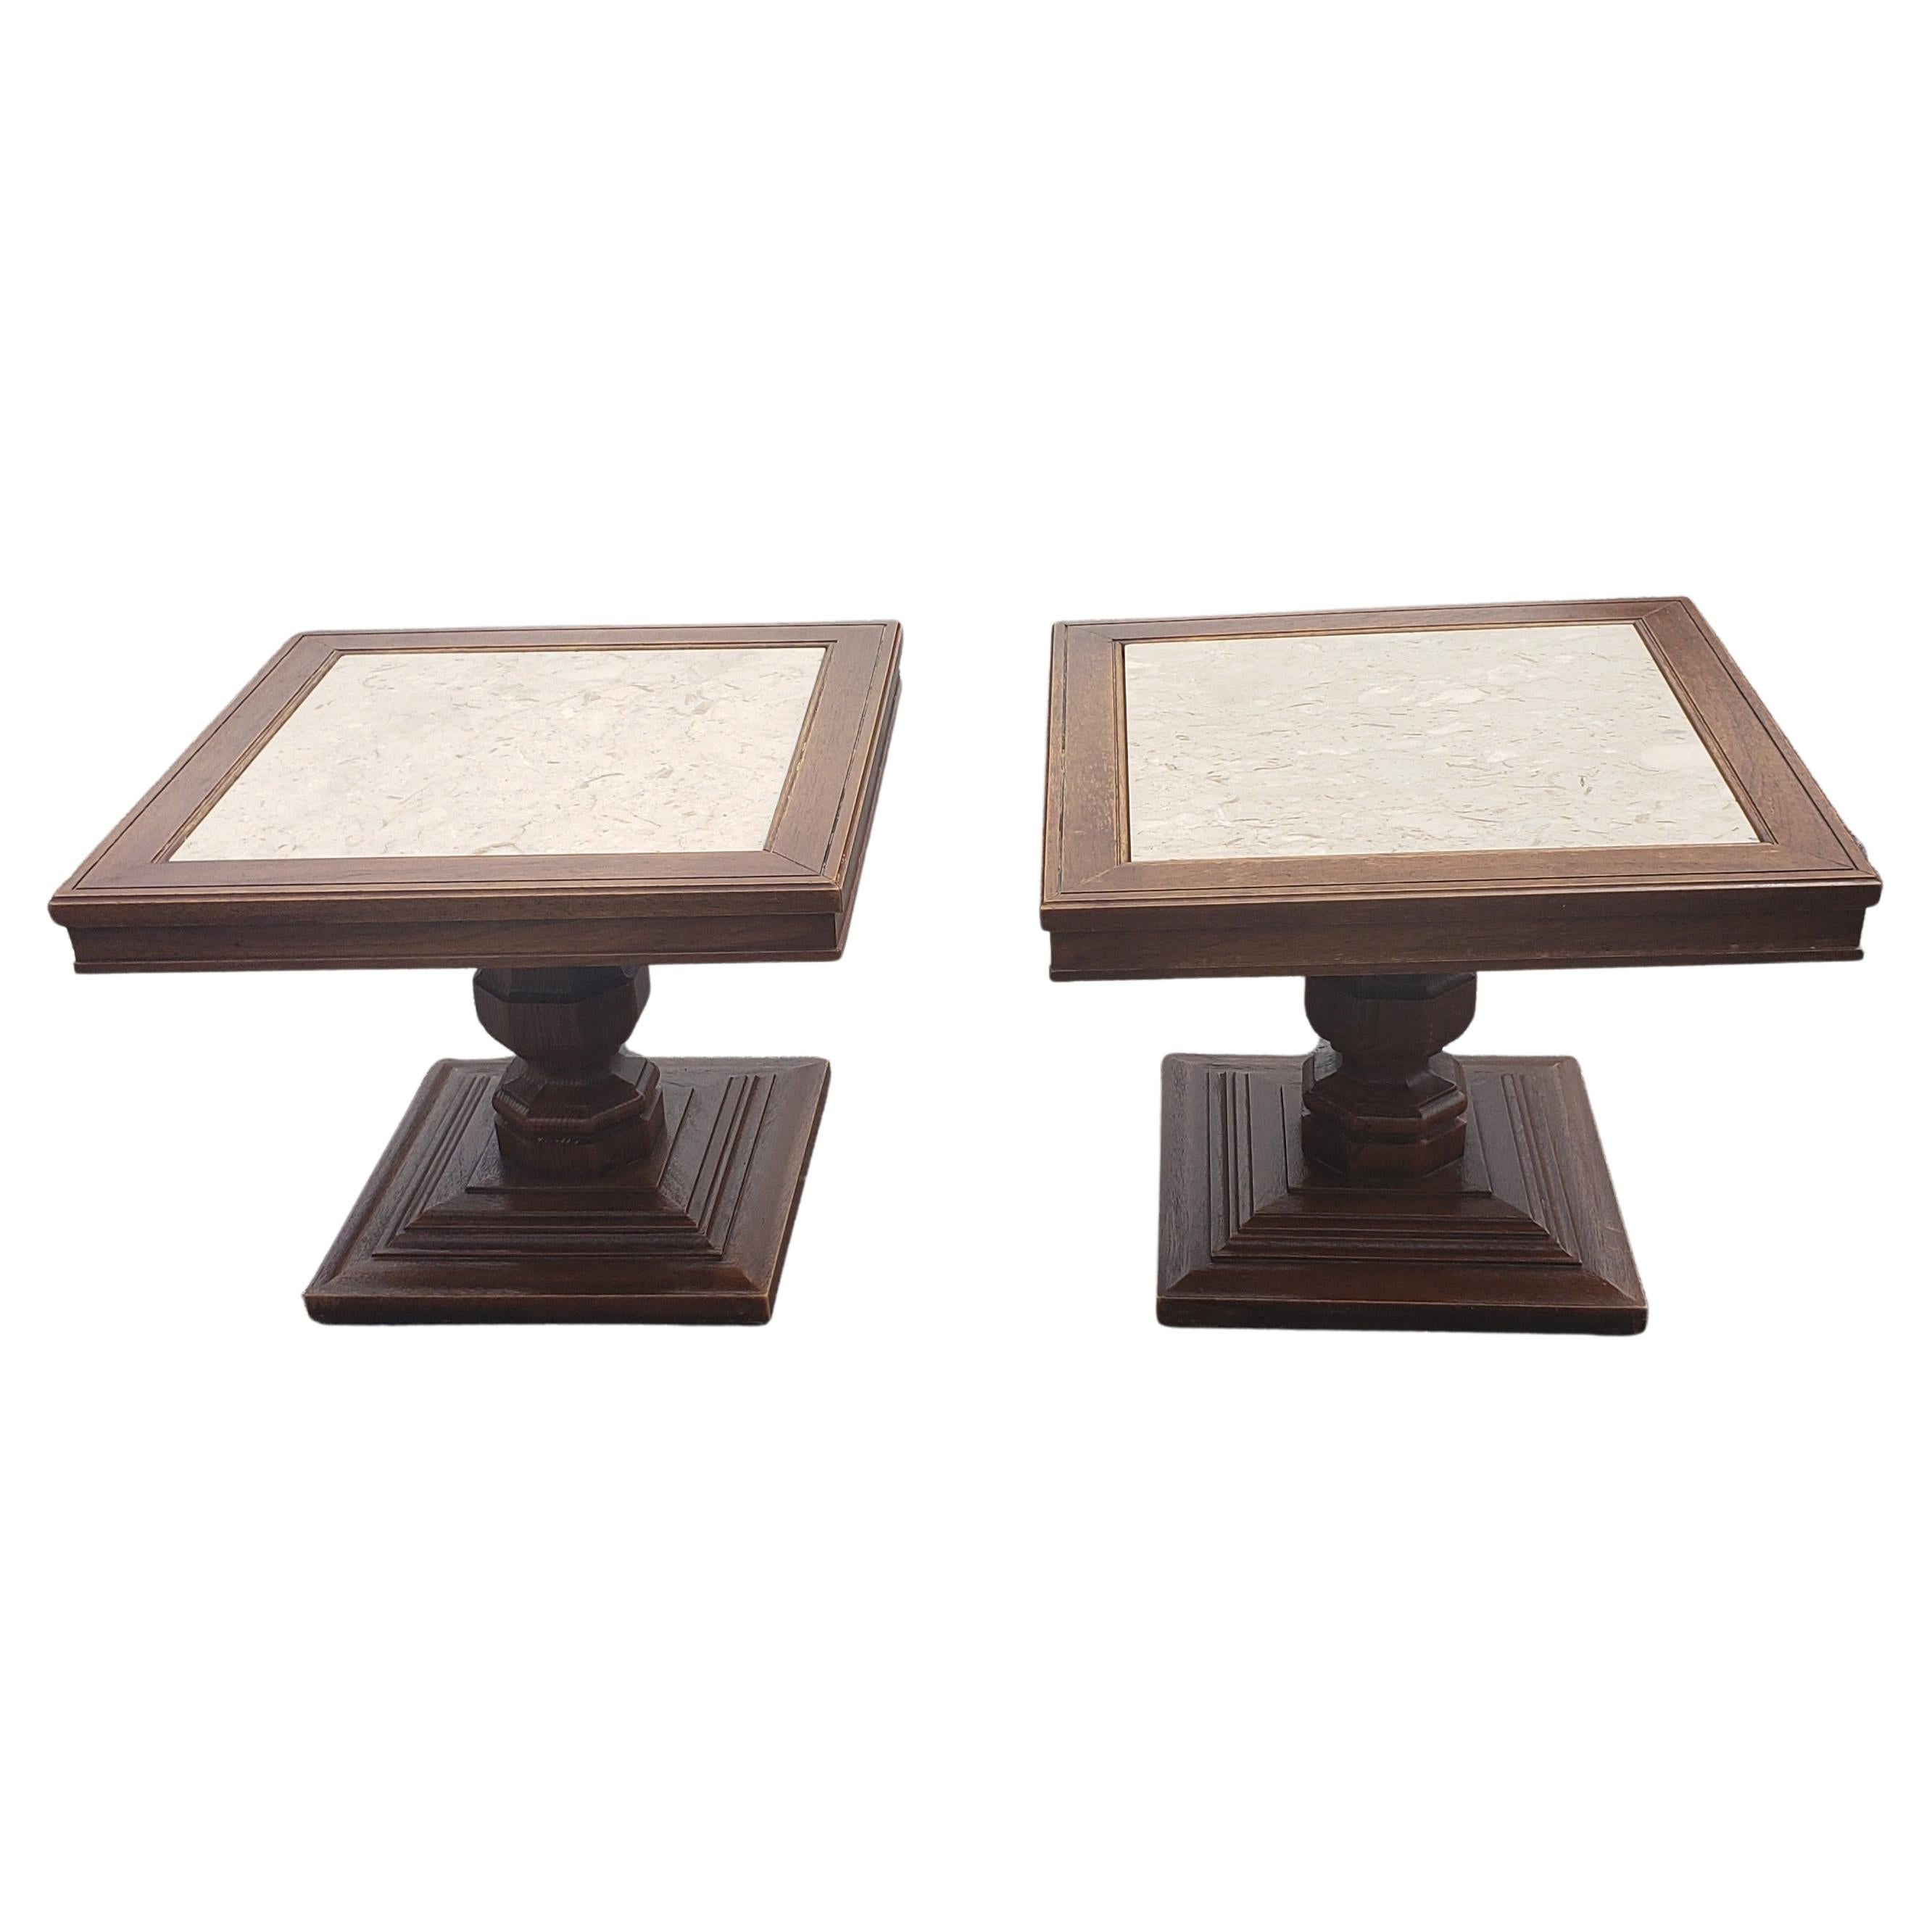 1960s Italian Pedestal Oak Side Tables with Marble Top Inserts, a Pair For Sale